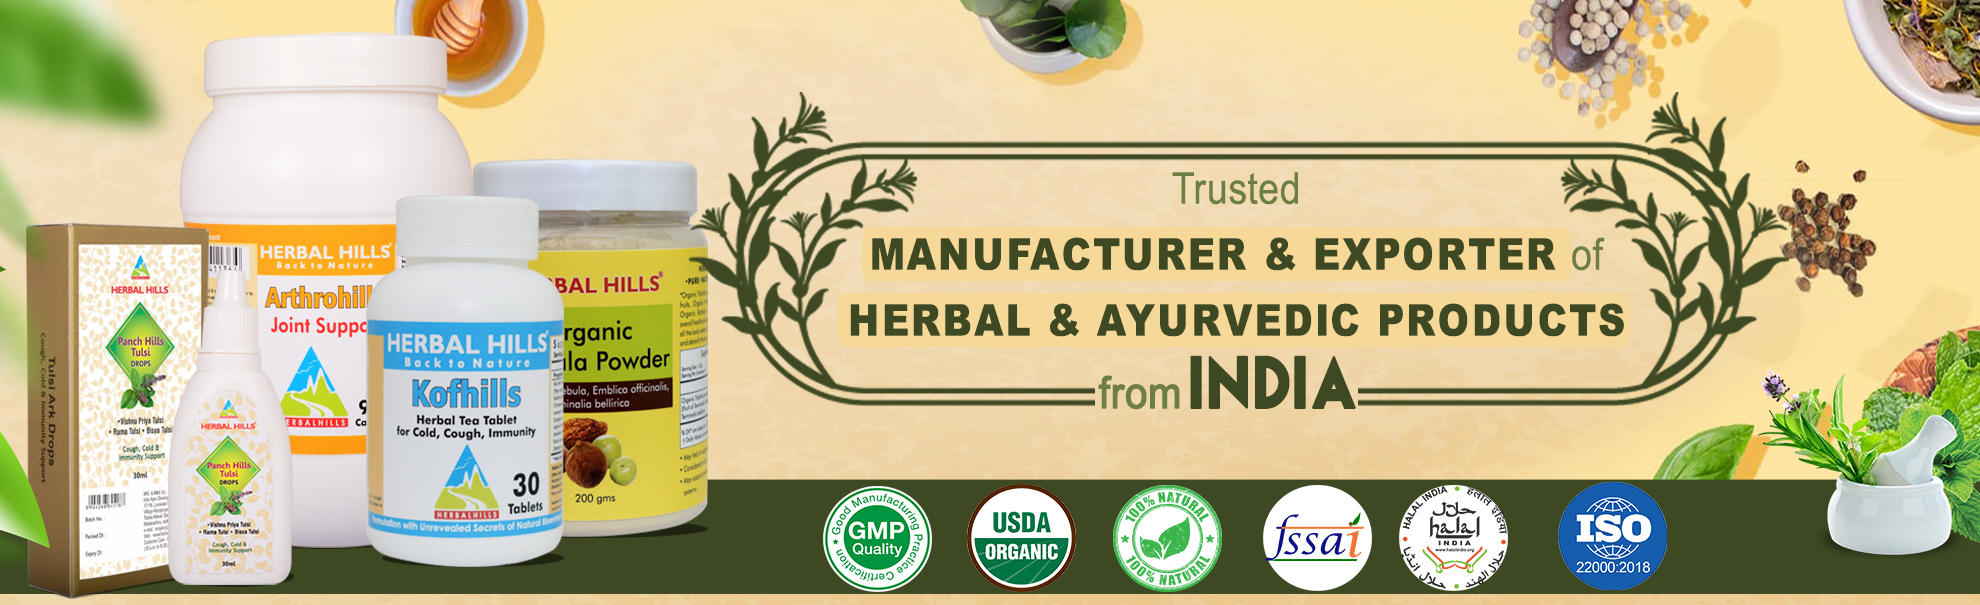 Herbal Product Manufacturer